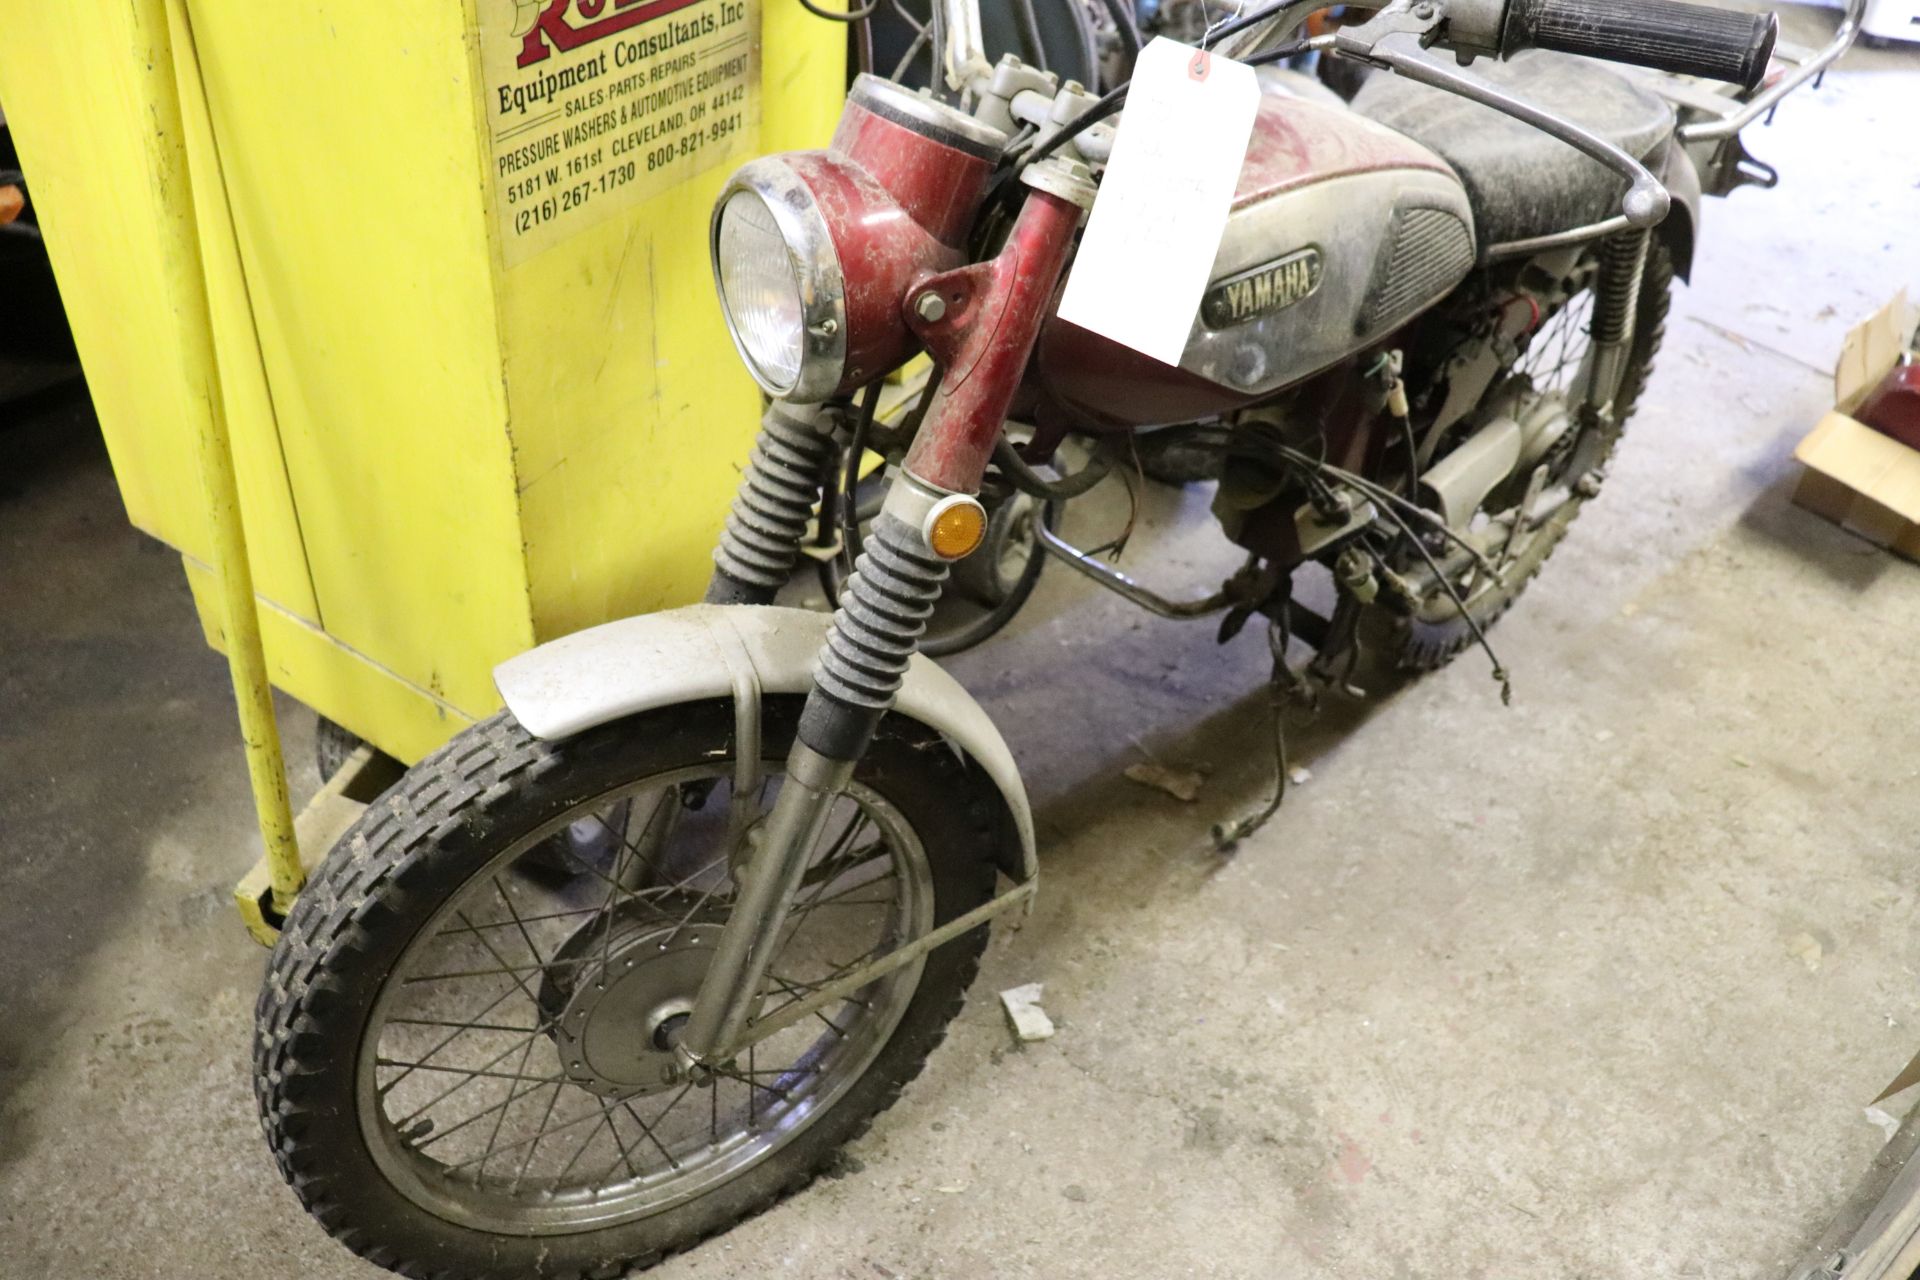 1970 Yamaha 100 L5TA, original paint, rolling chassis, 5,070 miles MINI BIKES MARKED AS PARTS BIKES, - Image 6 of 7